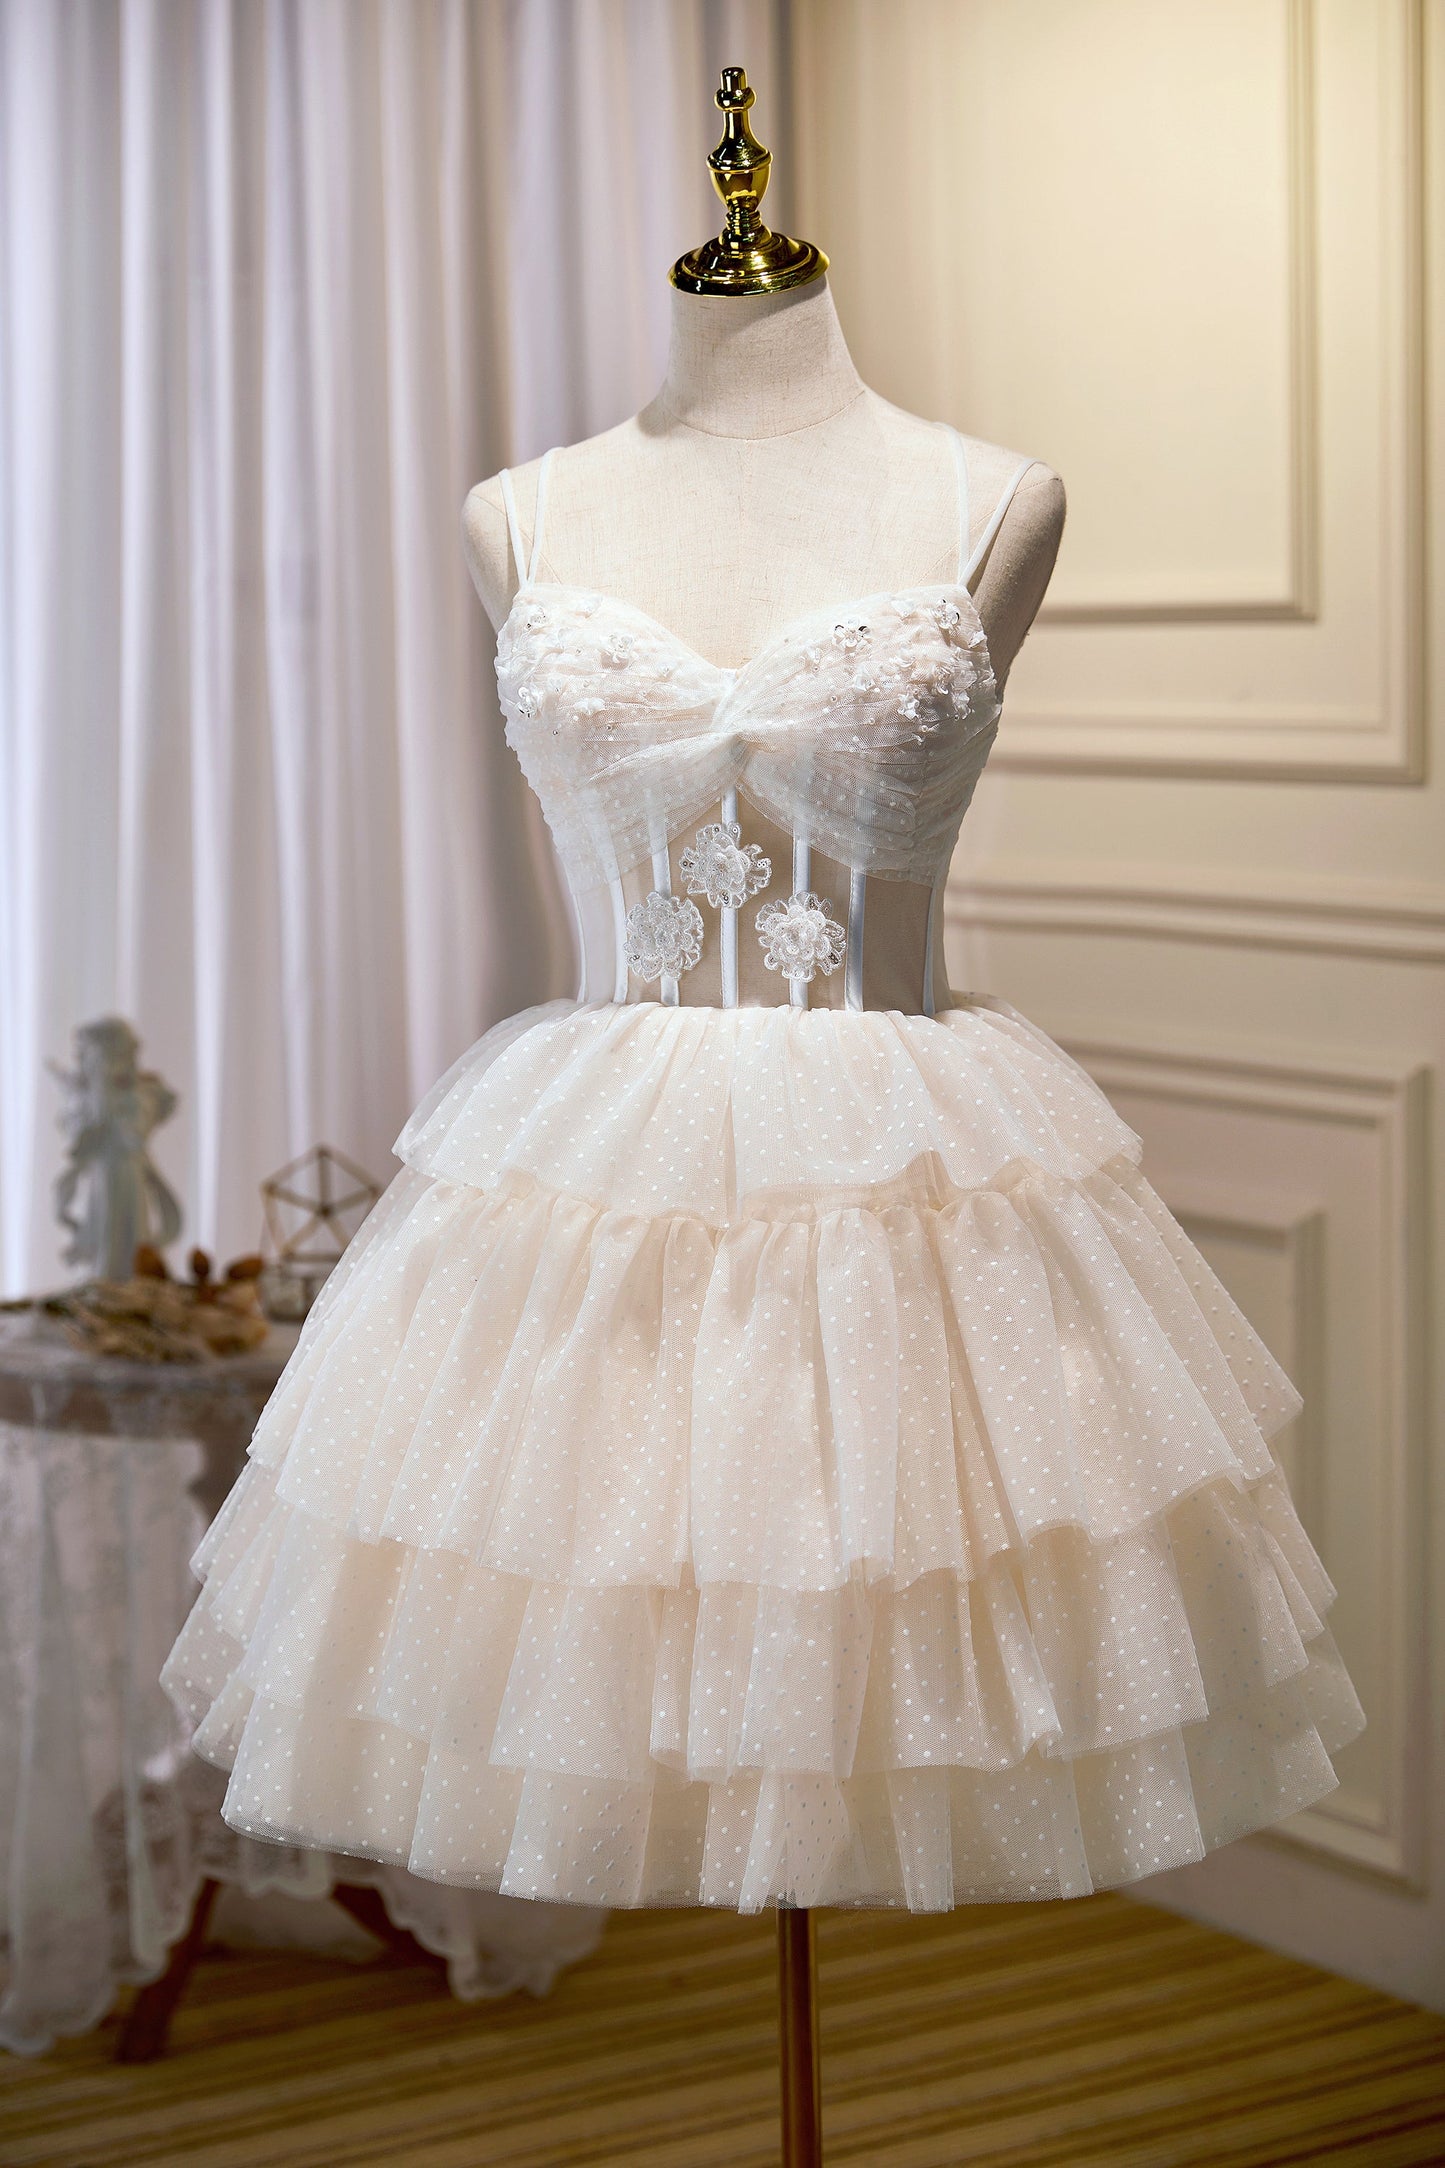 Pretty Ivory Spaghetti Straps Appliques Tulle Short Homecoming Dresses